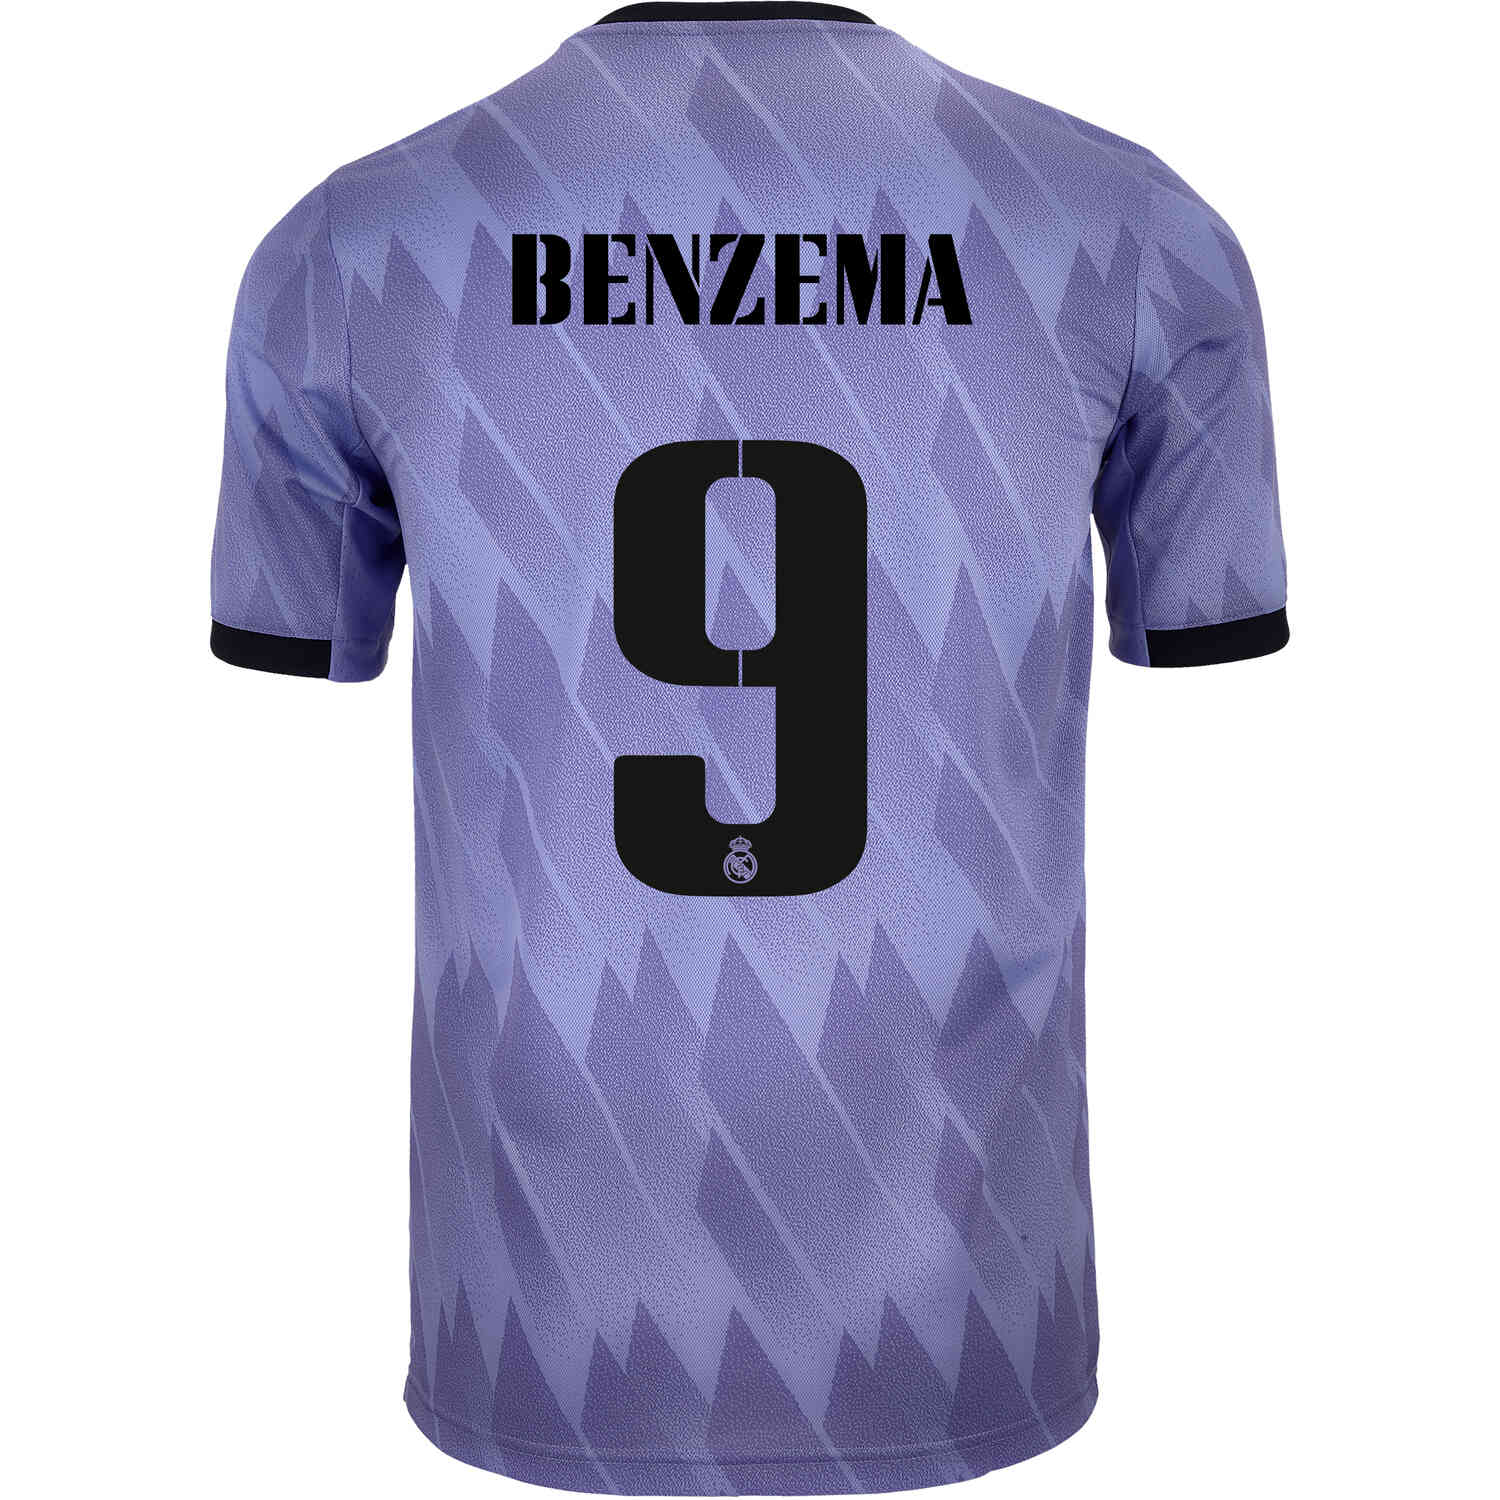 real madrid benzema jersey youth